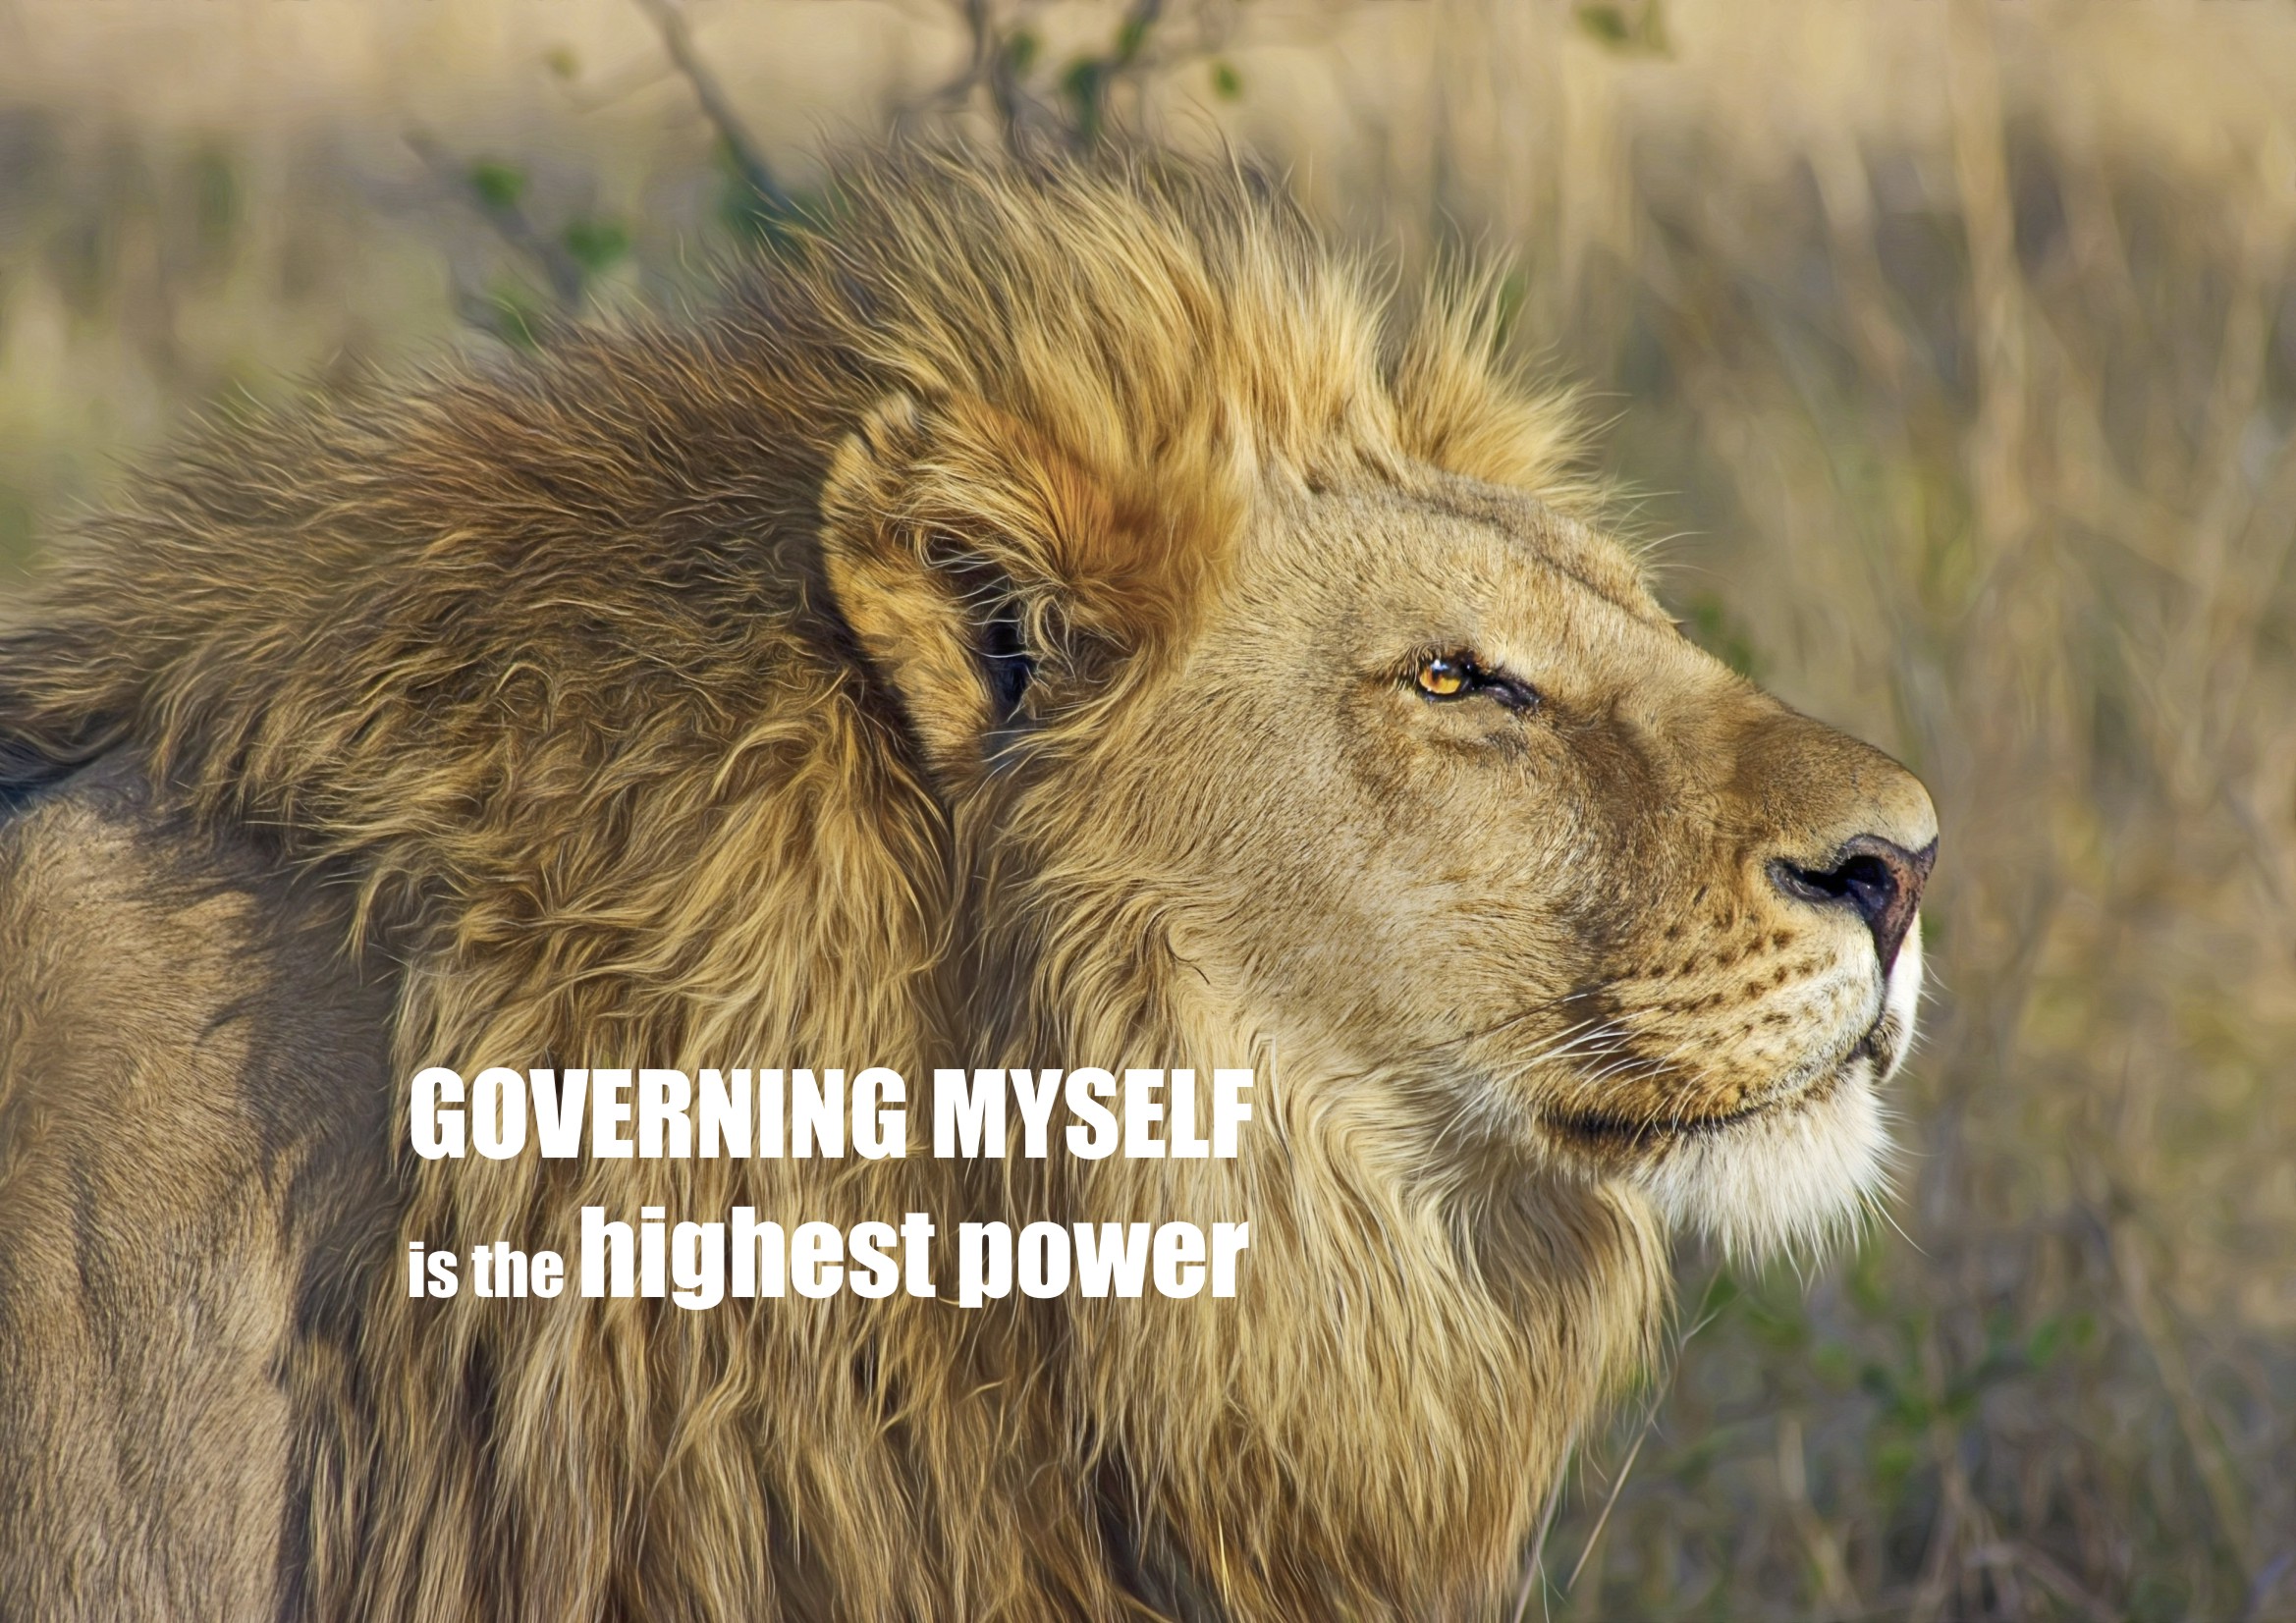 Governing myself is the highest power